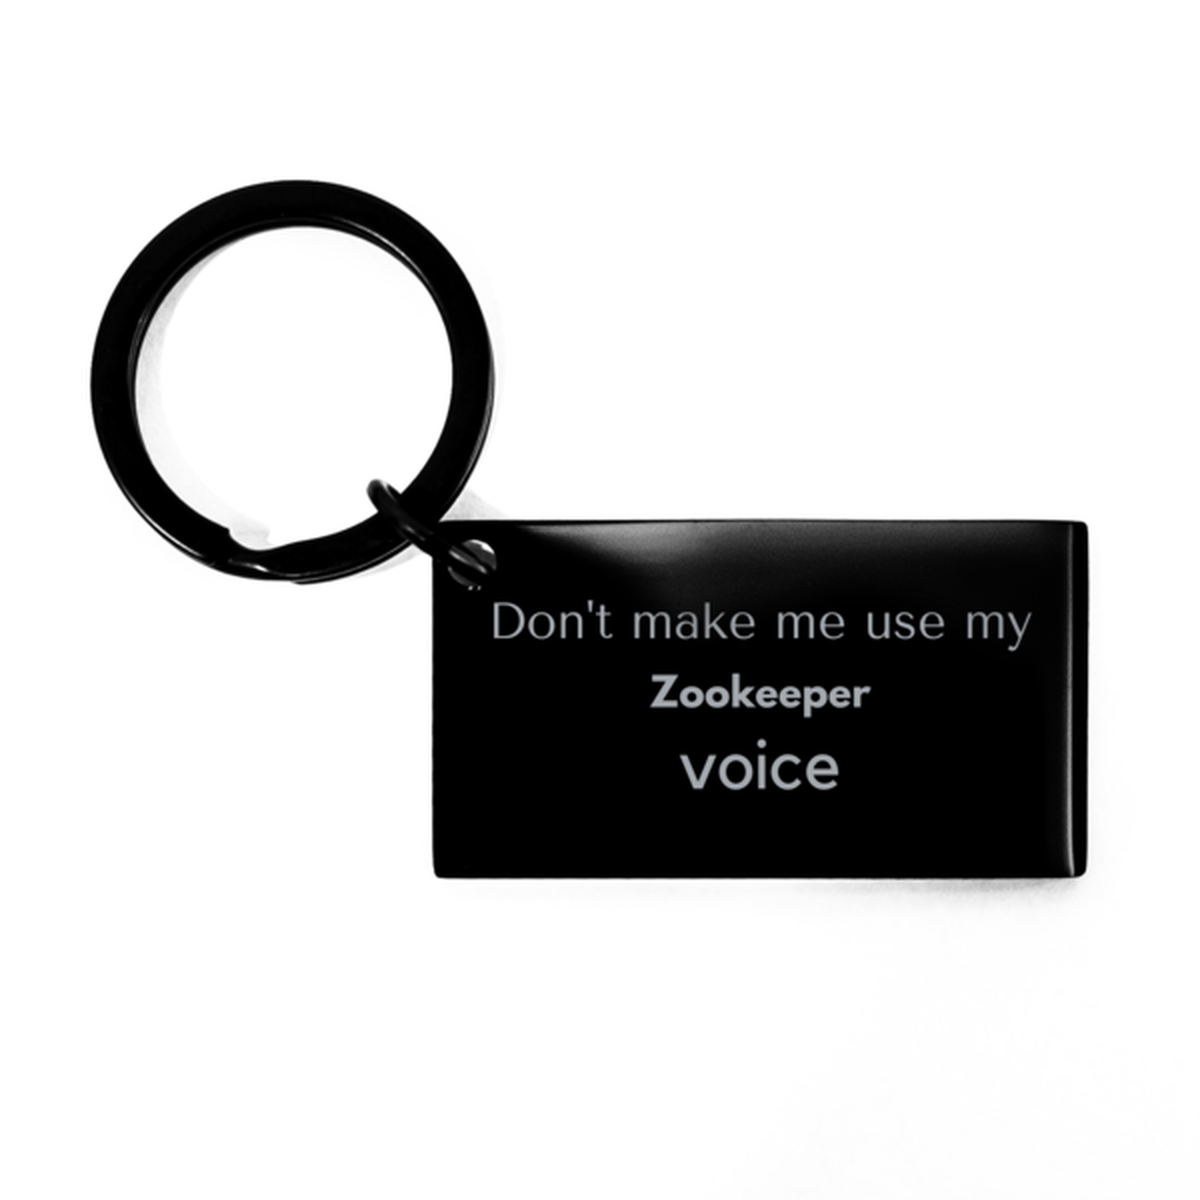 Don't make me use my Zookeeper voice, Sarcasm Zookeeper Gifts, Christmas Zookeeper Keychain Birthday Unique Gifts For Zookeeper Coworkers, Men, Women, Colleague, Friends